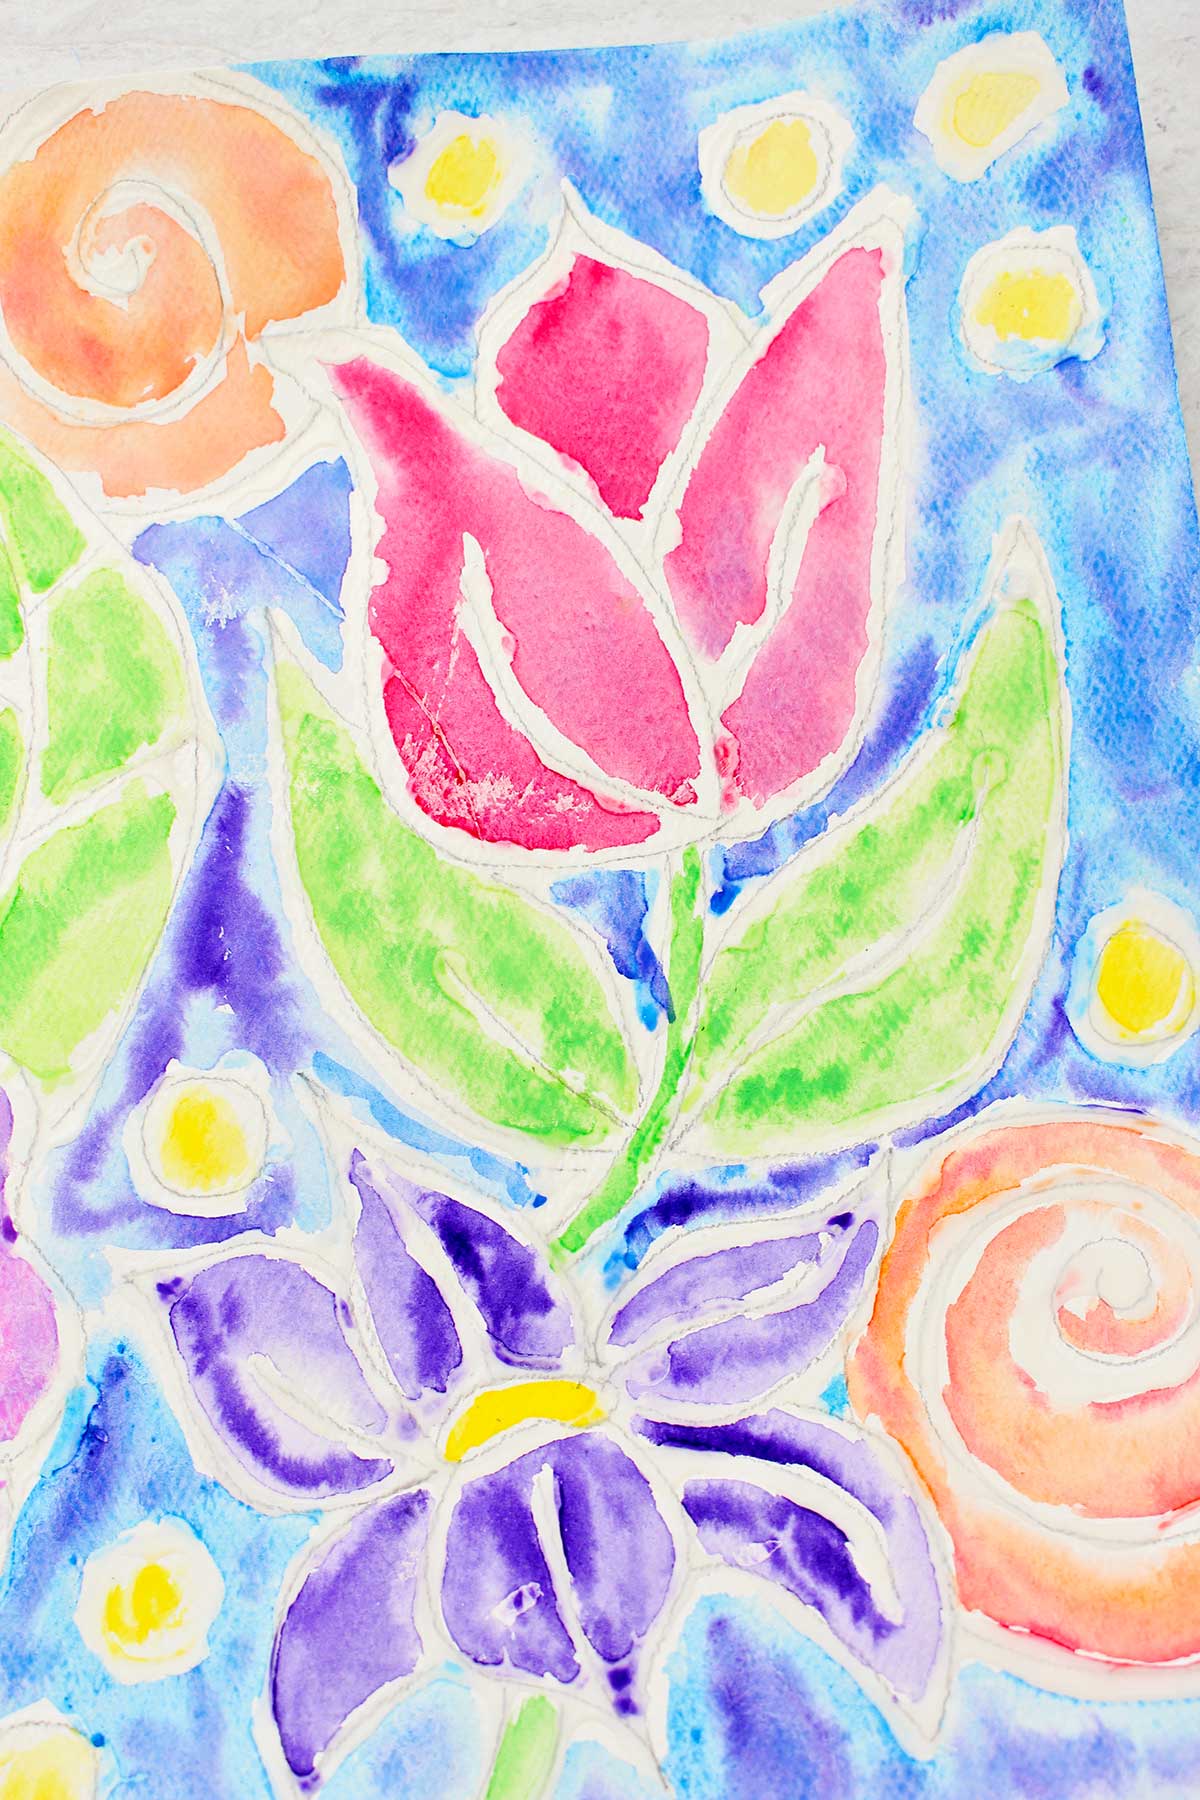 Close up view of a tulip in the glue line painting.